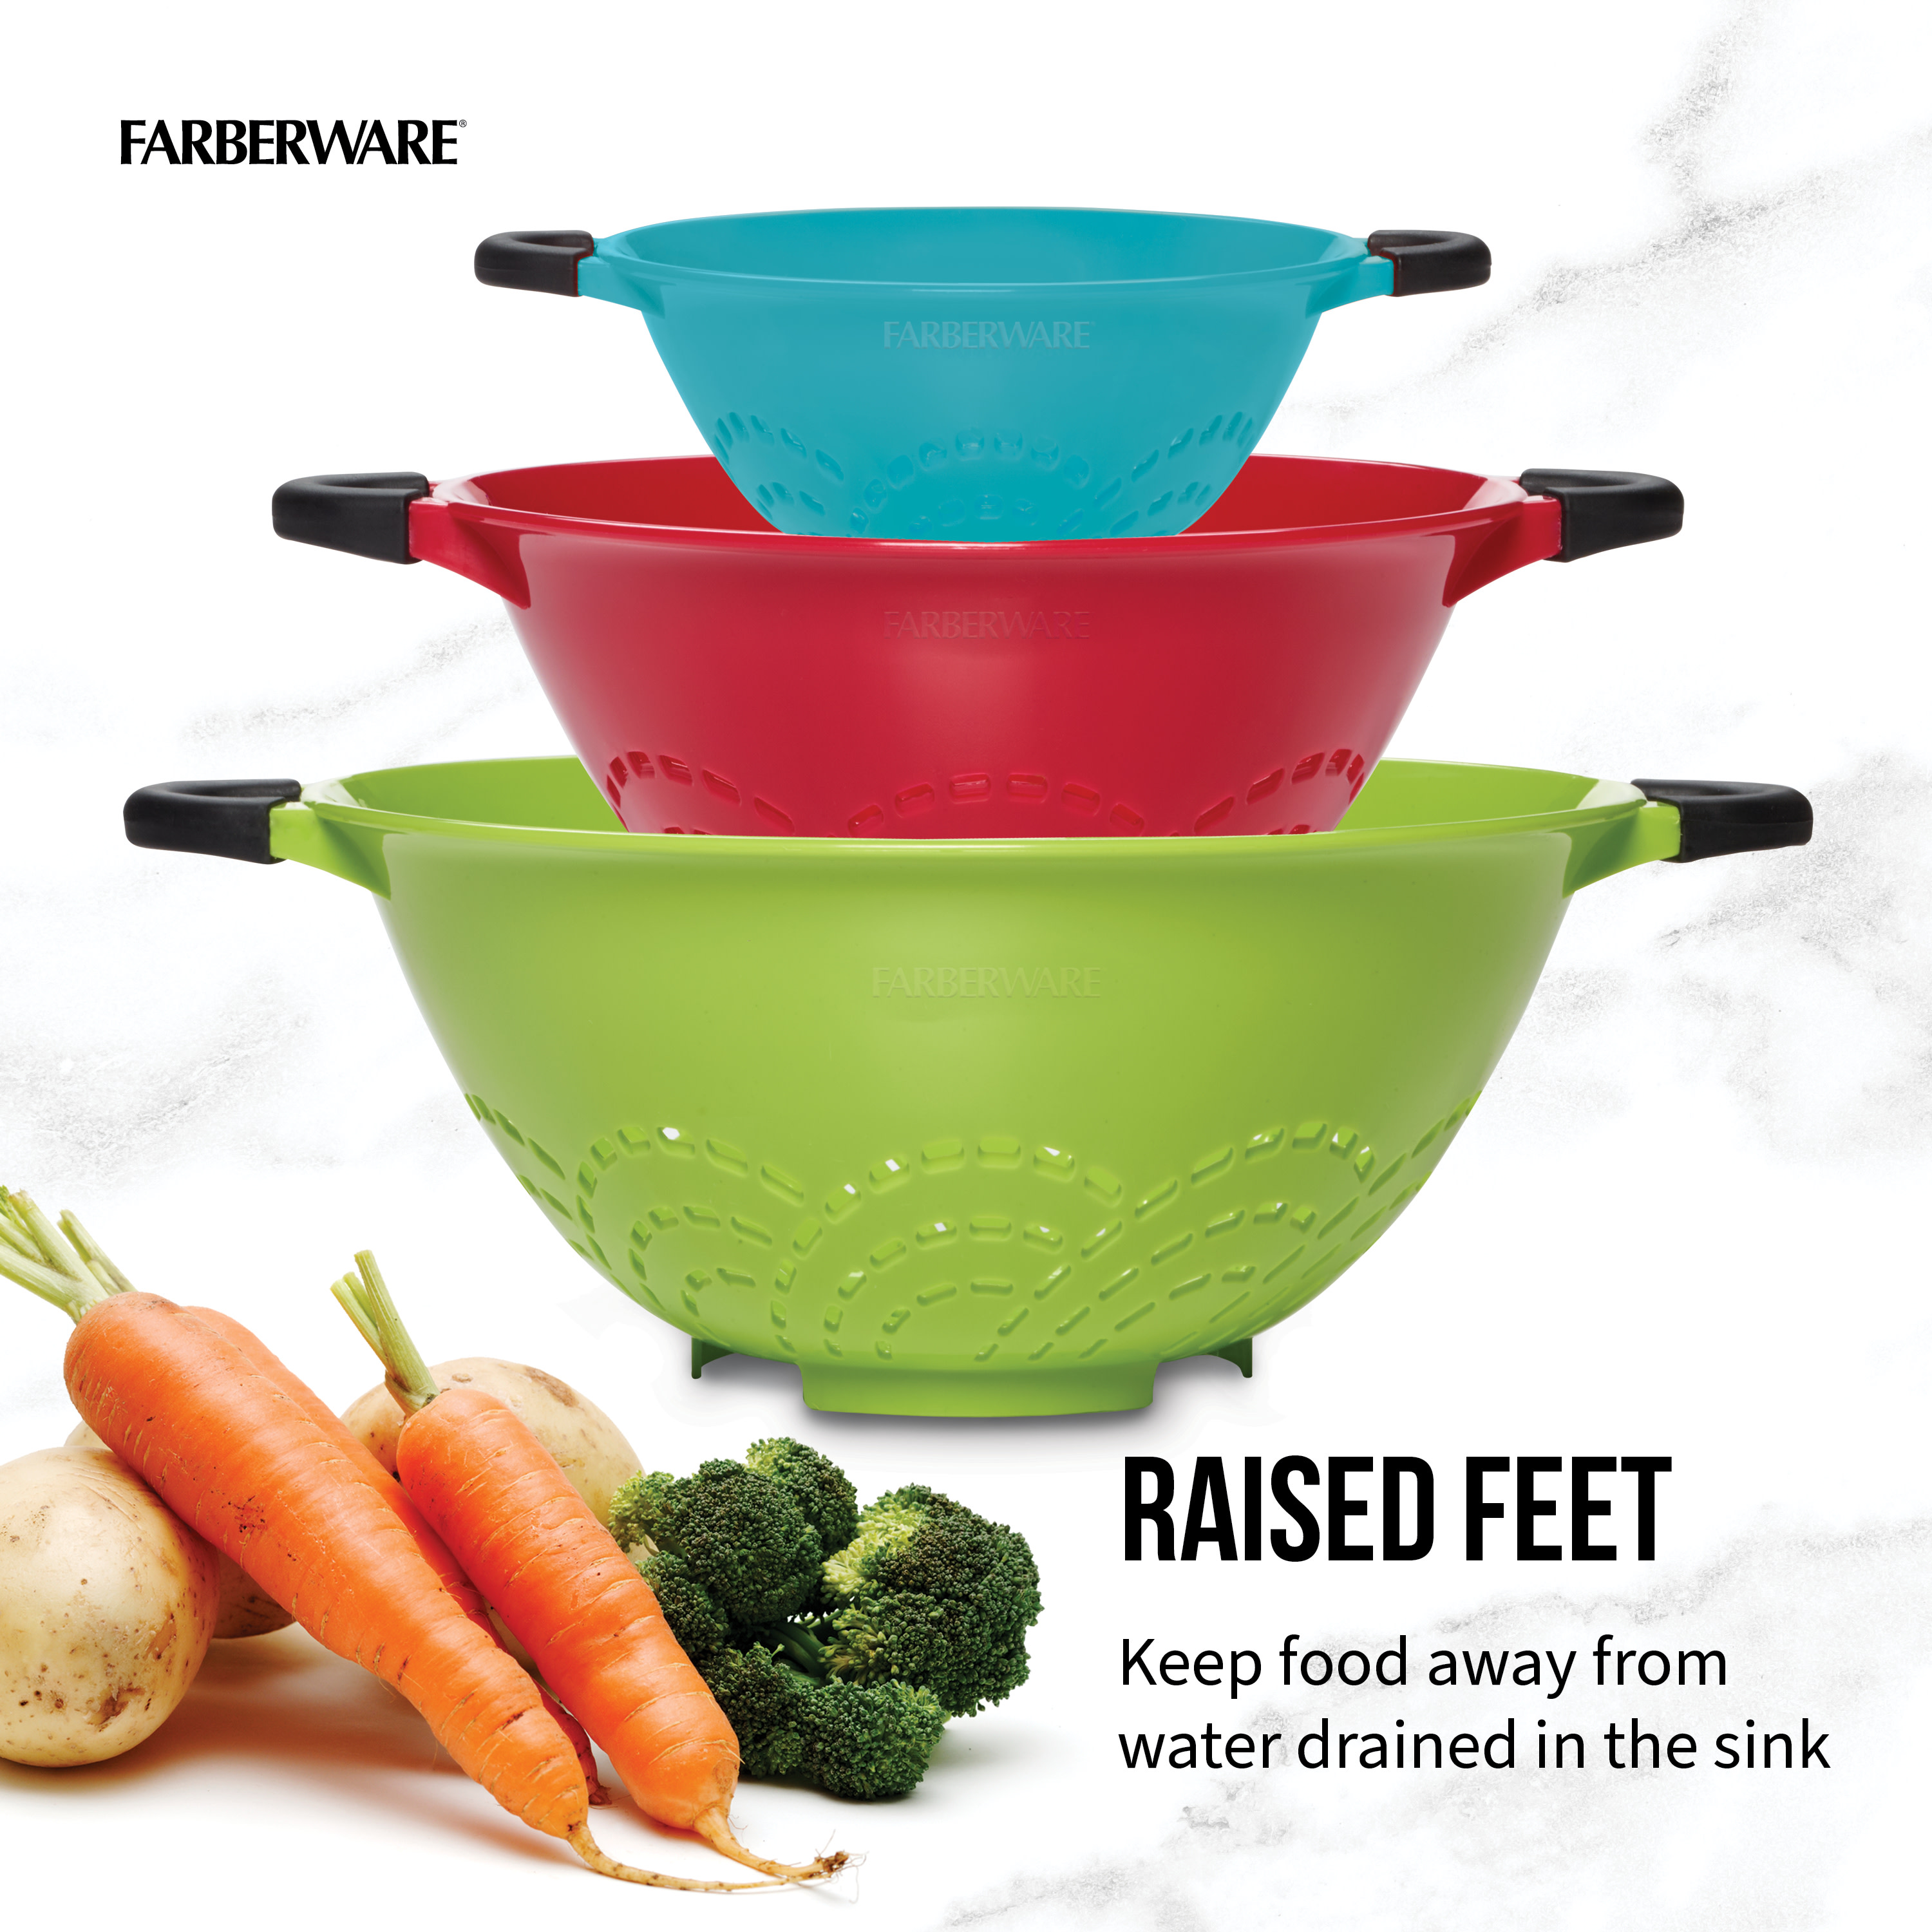 Farberware Professional Soft Grips Set of 3 Strainer Colanders Multi-Color - image 5 of 10